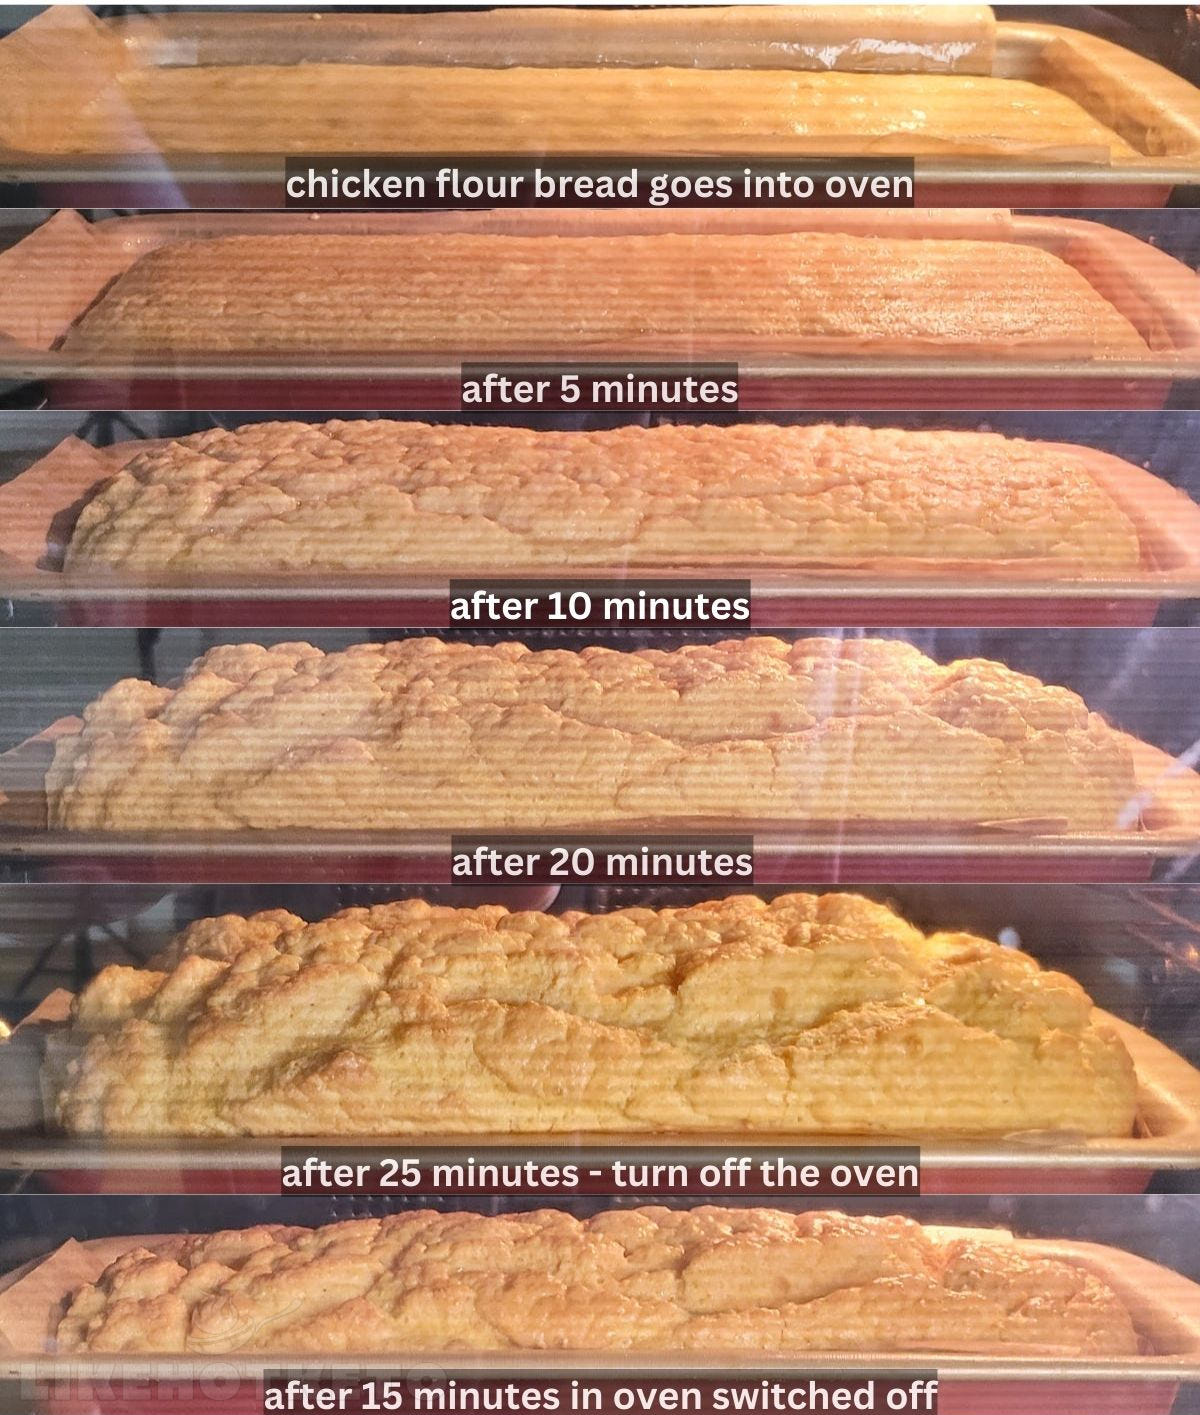 Collage of chicken flour bread baking in the oven, from the moment it goes into the oven through minutes 5, 10, 20, oven off and ready.